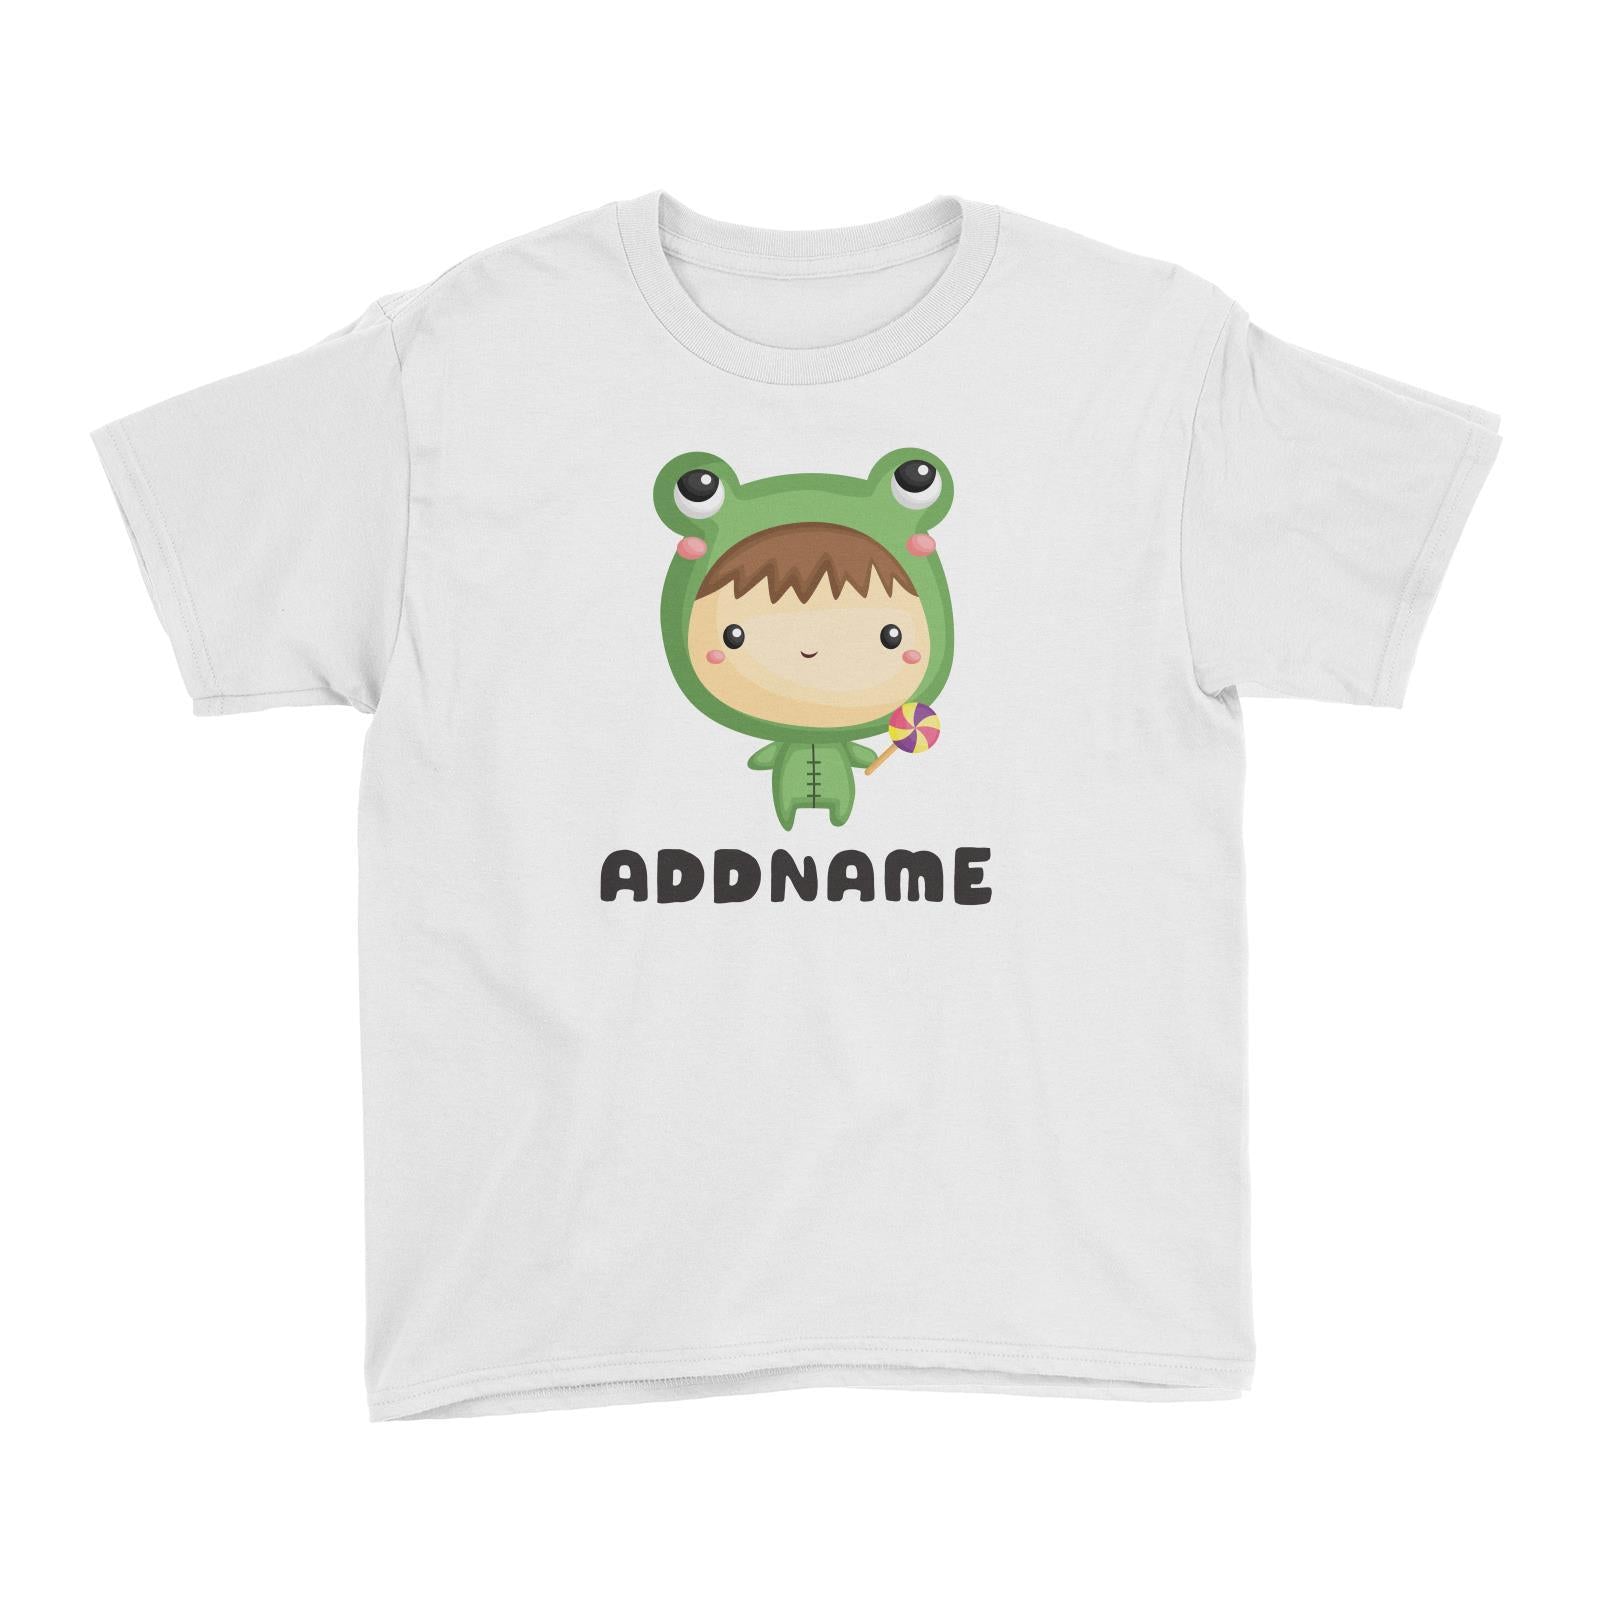 Birthday Frog Baby Boy Wearing Frog Suit Holding Lolipop Addname Kid's T-Shirt